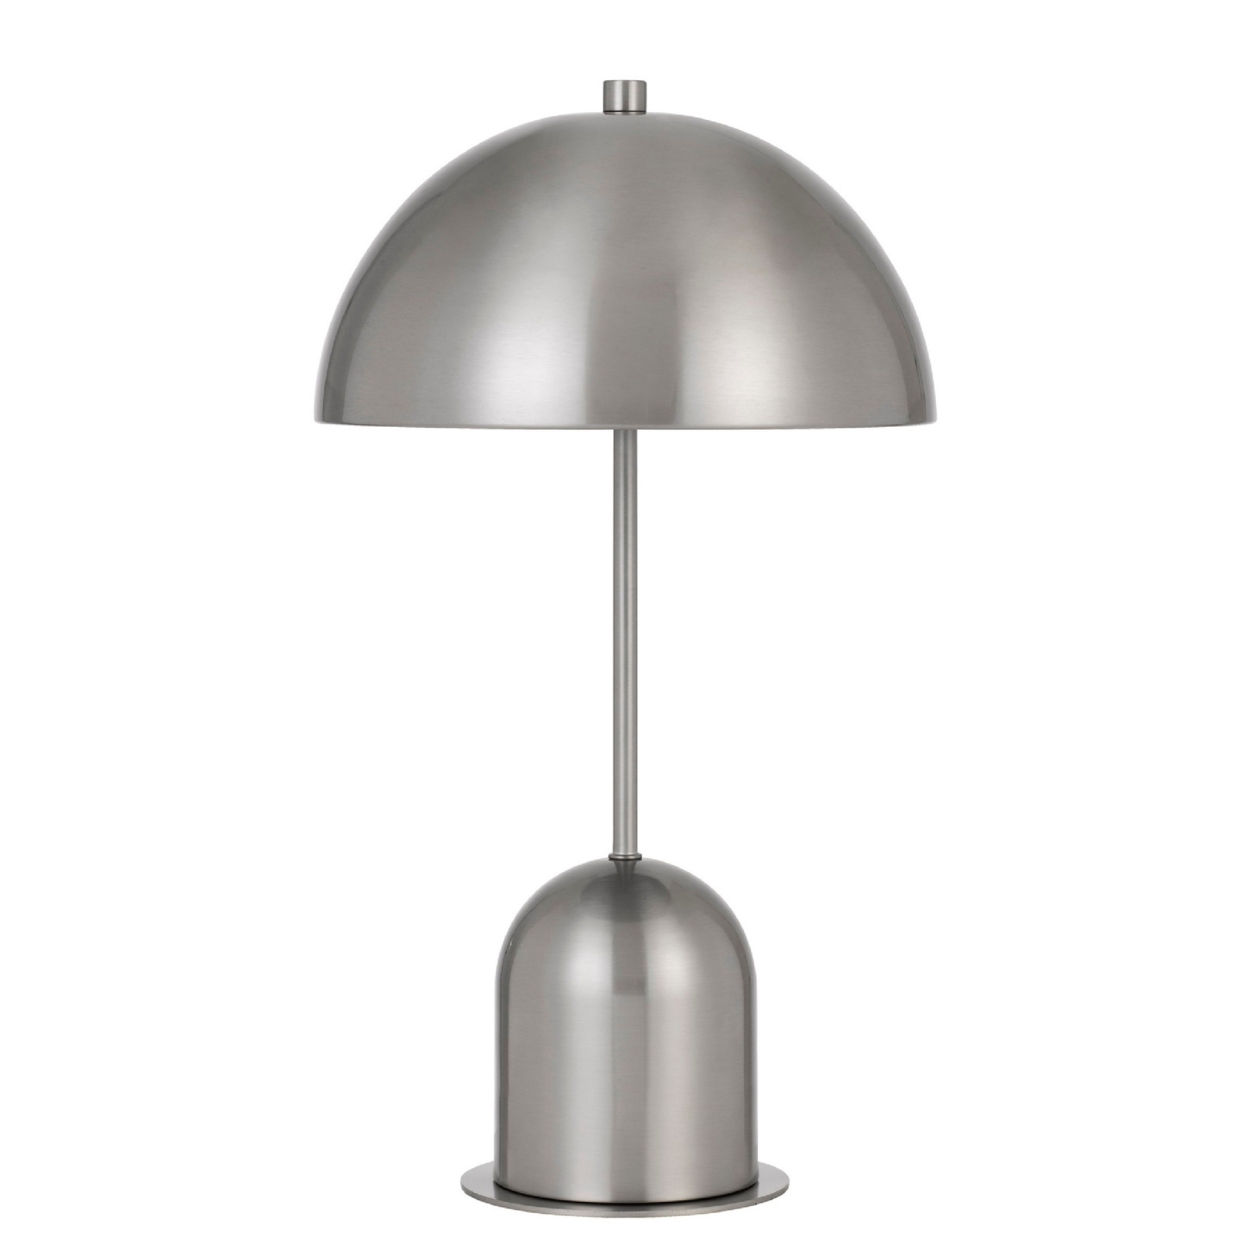 20 Inch Metal Accent Table Lamp With Dome Shade, Silver- Saltoro Sherpi